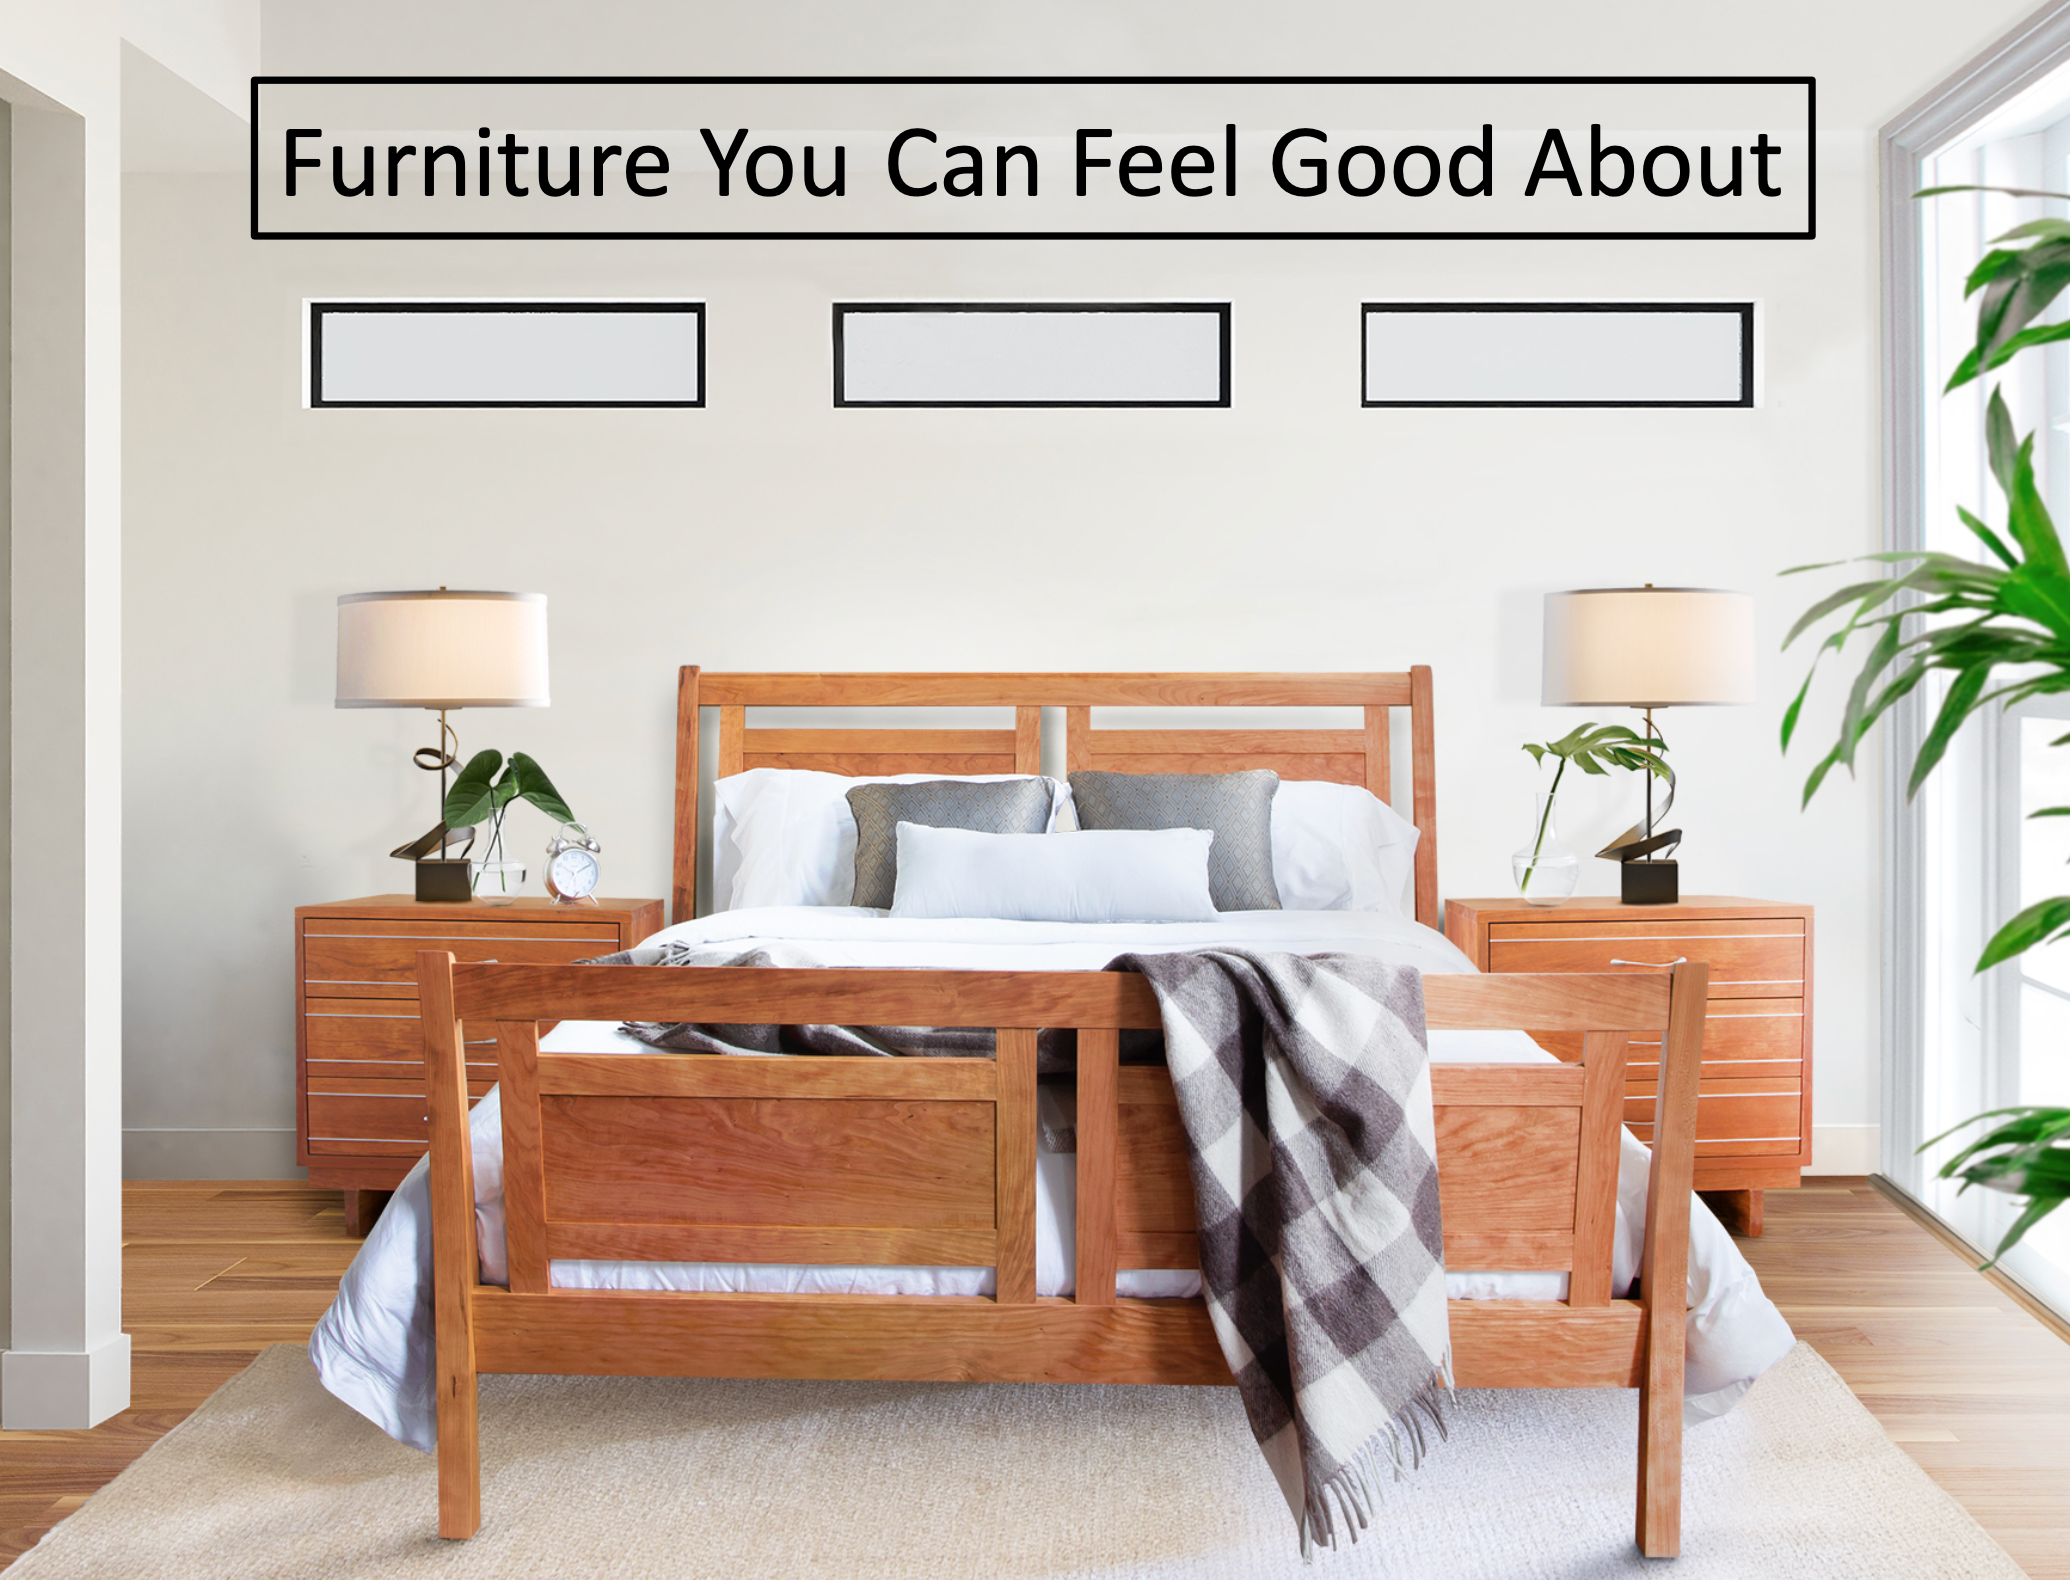 Furniture you can feel good about